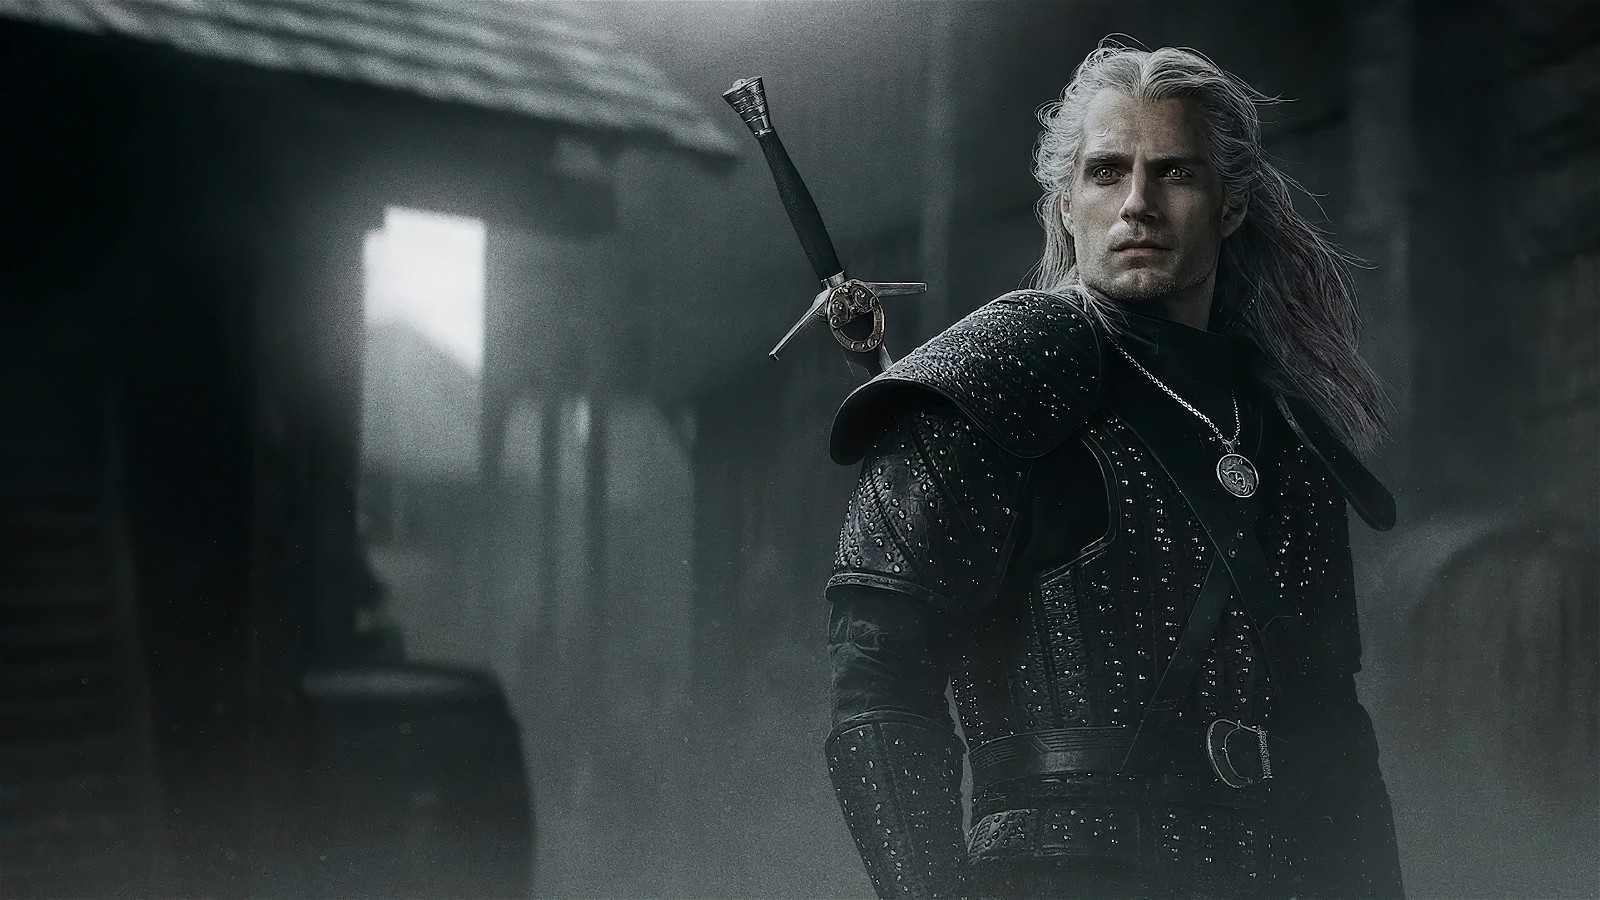 Henry Cavill as The Witcher (2019-)